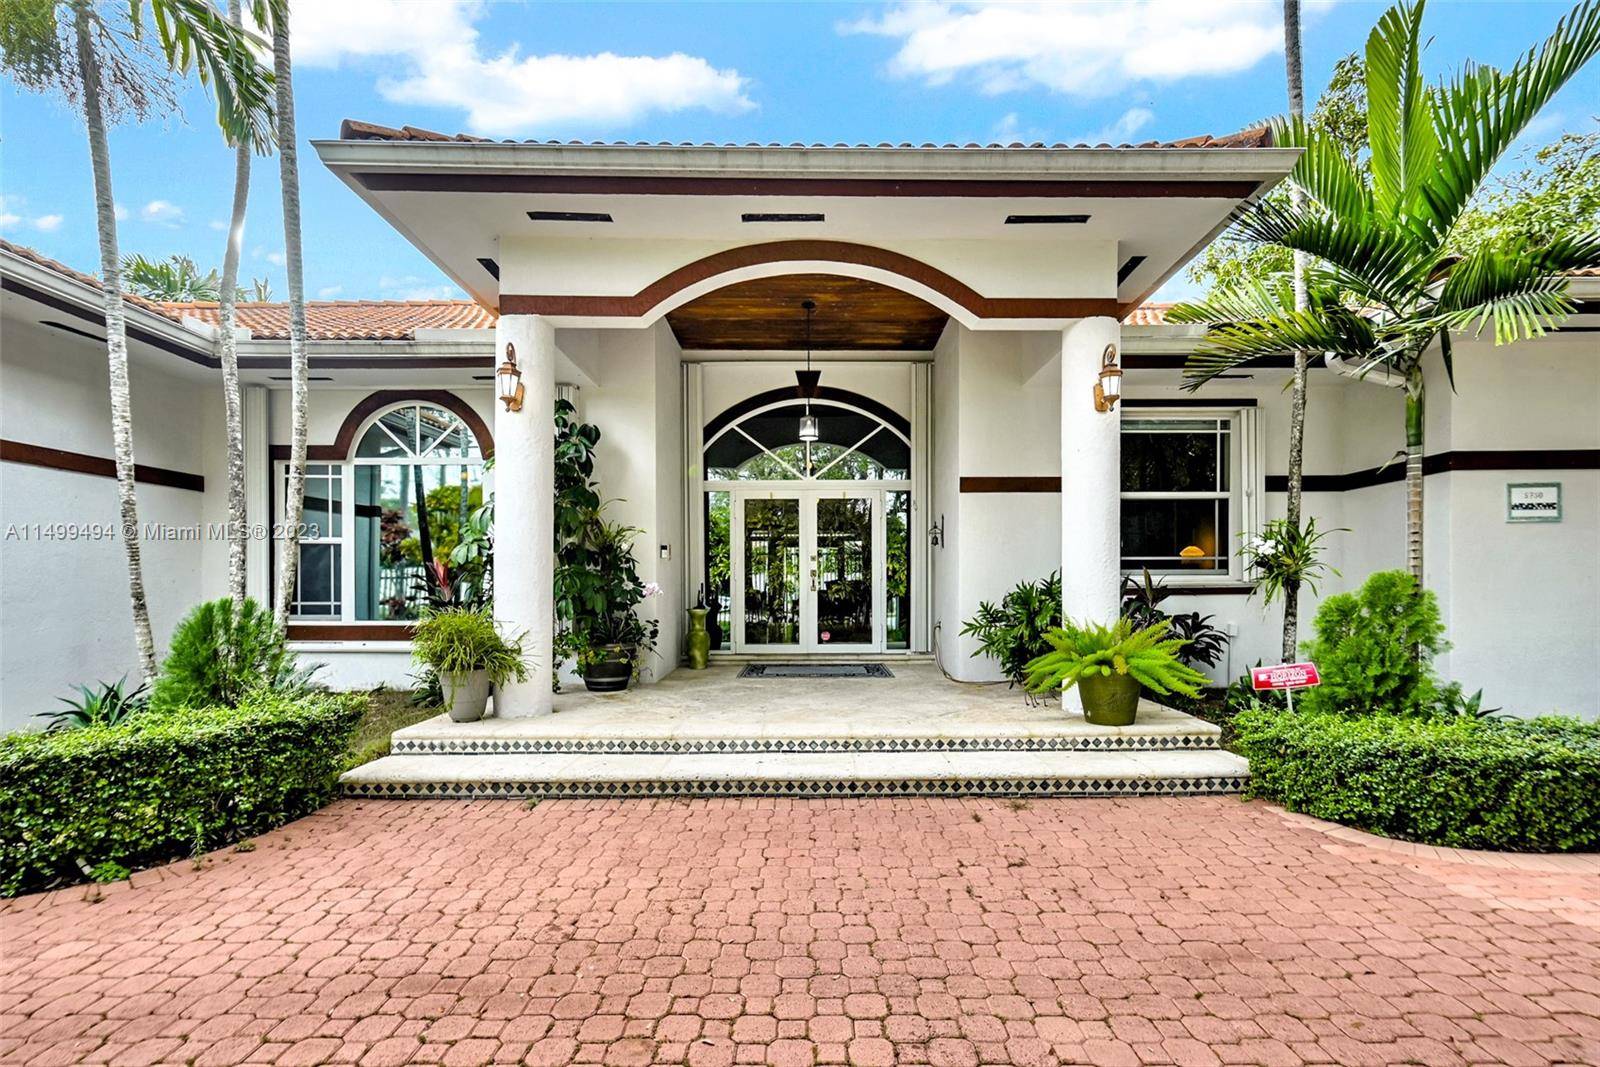 Welcome home. Step inside this amazing Mediterranean home located in the Beverly Hills subdivision of South Miami.